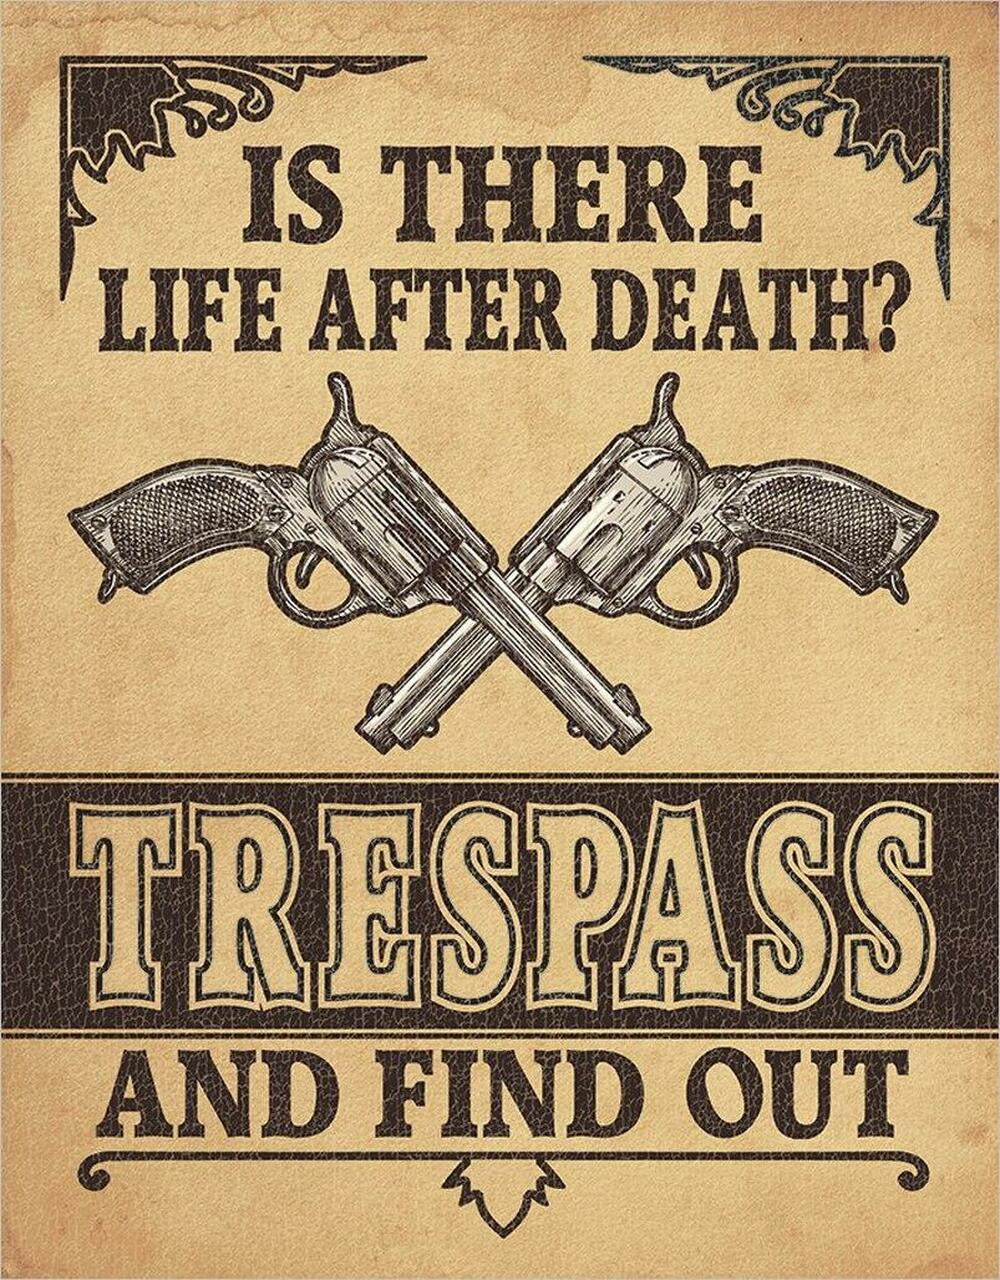 Is There Life After Death? Tresspass and Find Out - Tin Sign